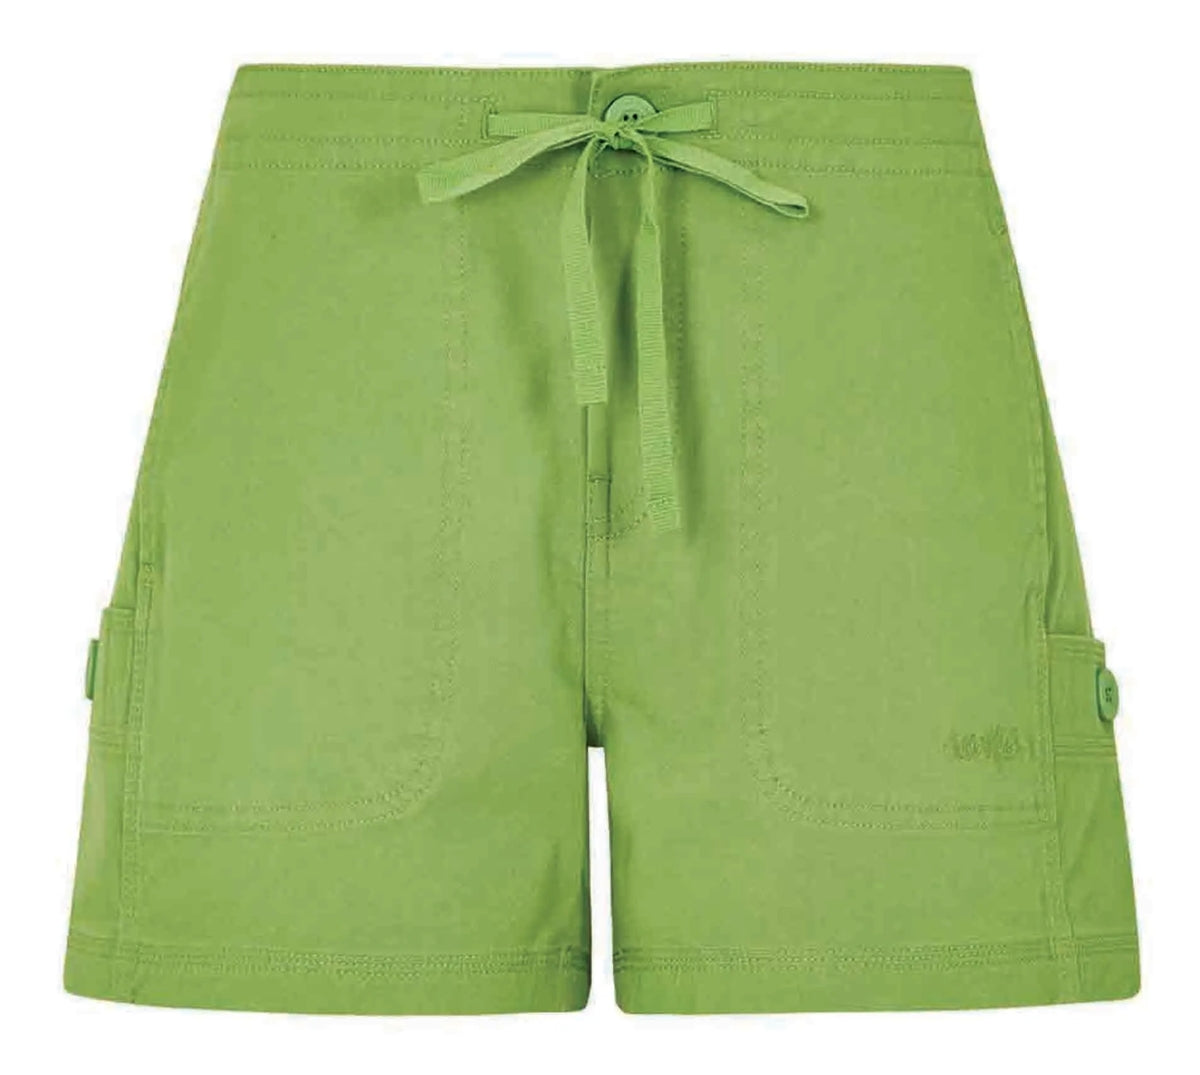 Women's tie front cotton Willoughby shorts from Weird Fish in Kiwi Green.